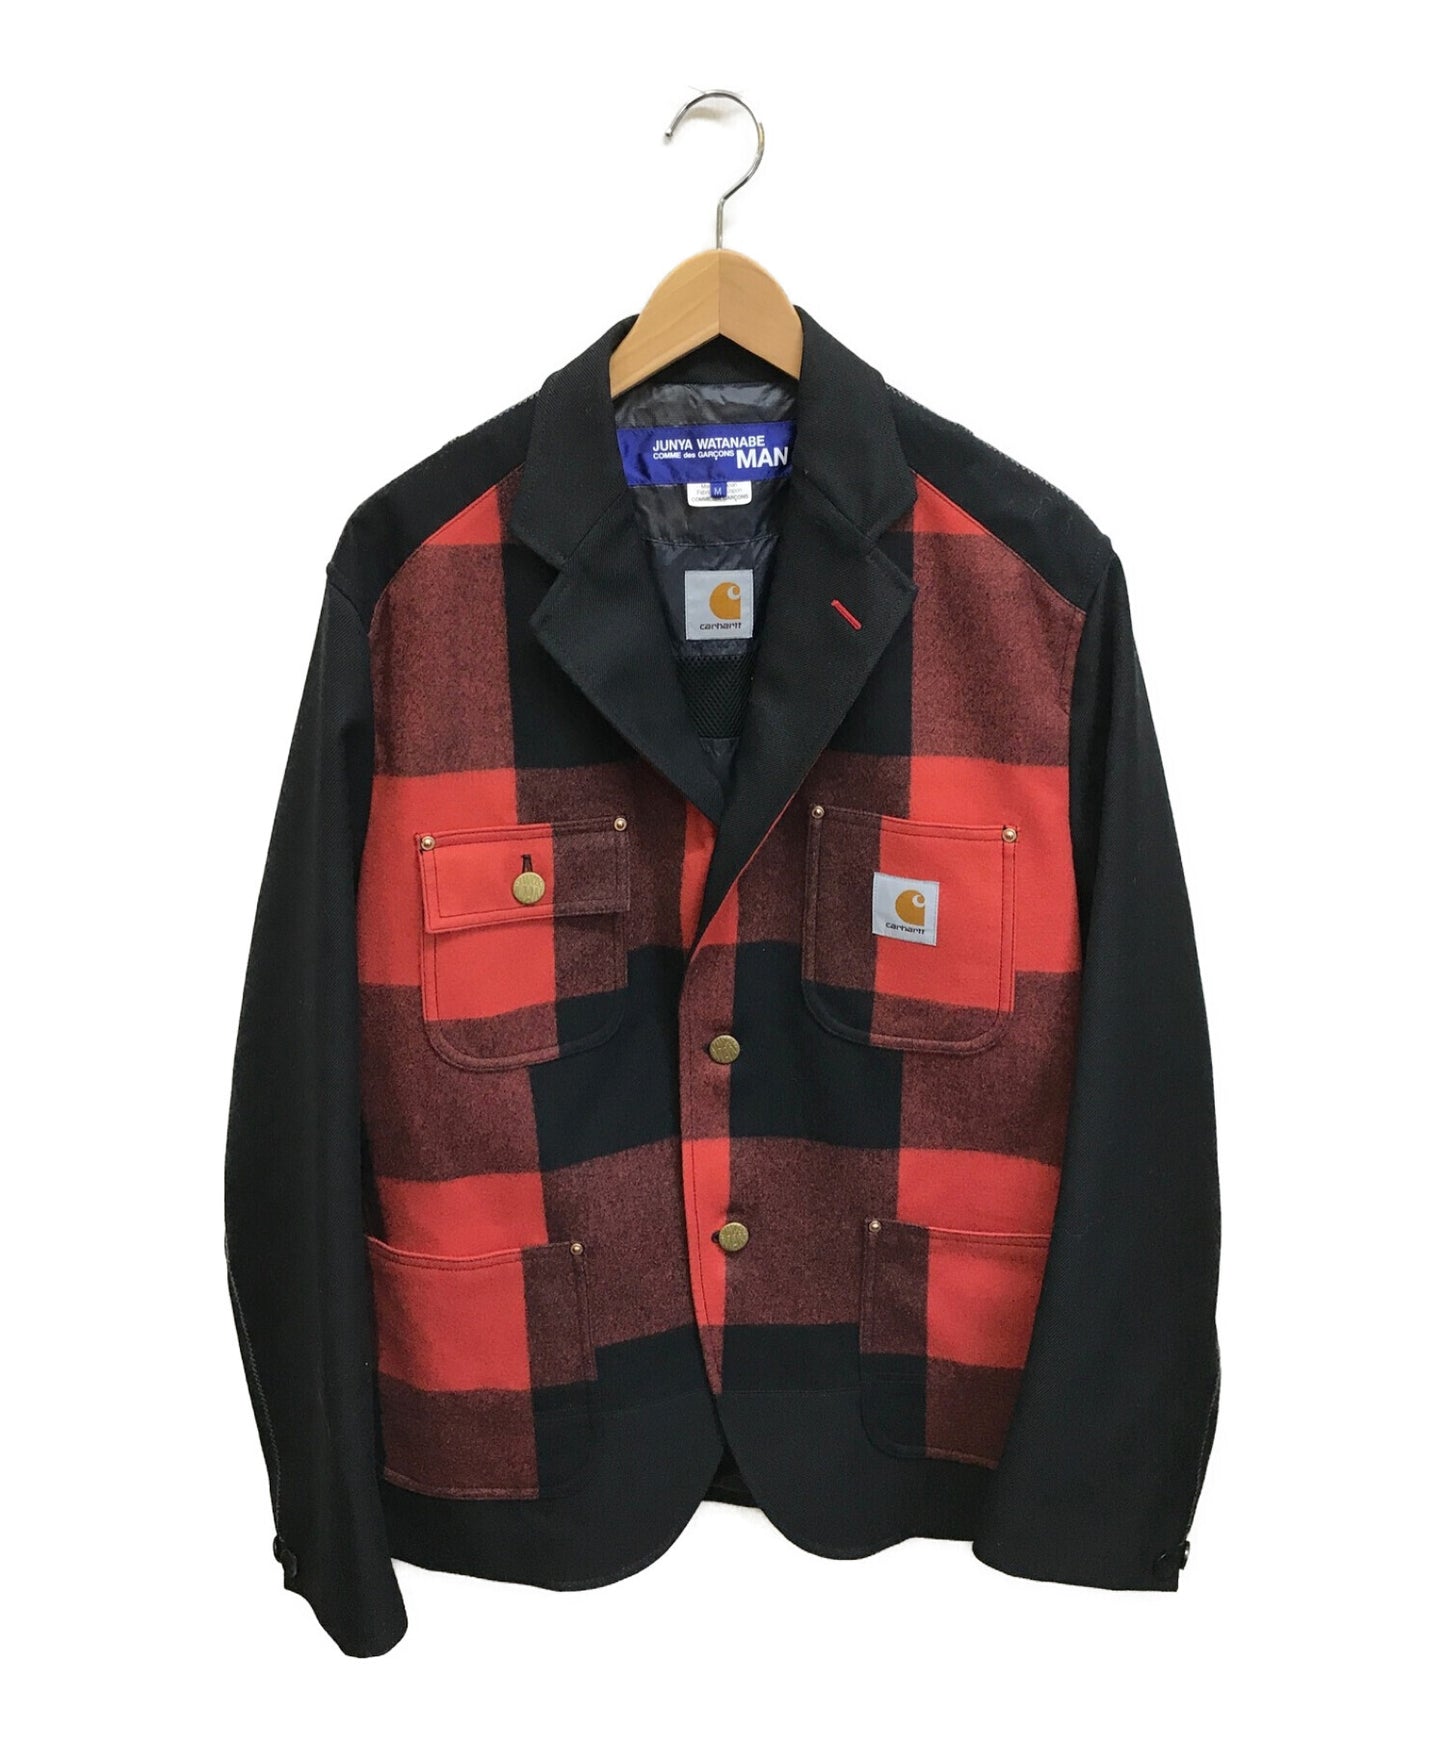 Comme des Garcons Junya Watanabe Man Wool Surge Duck-Switched Check Jacket AD2021 WH-J006